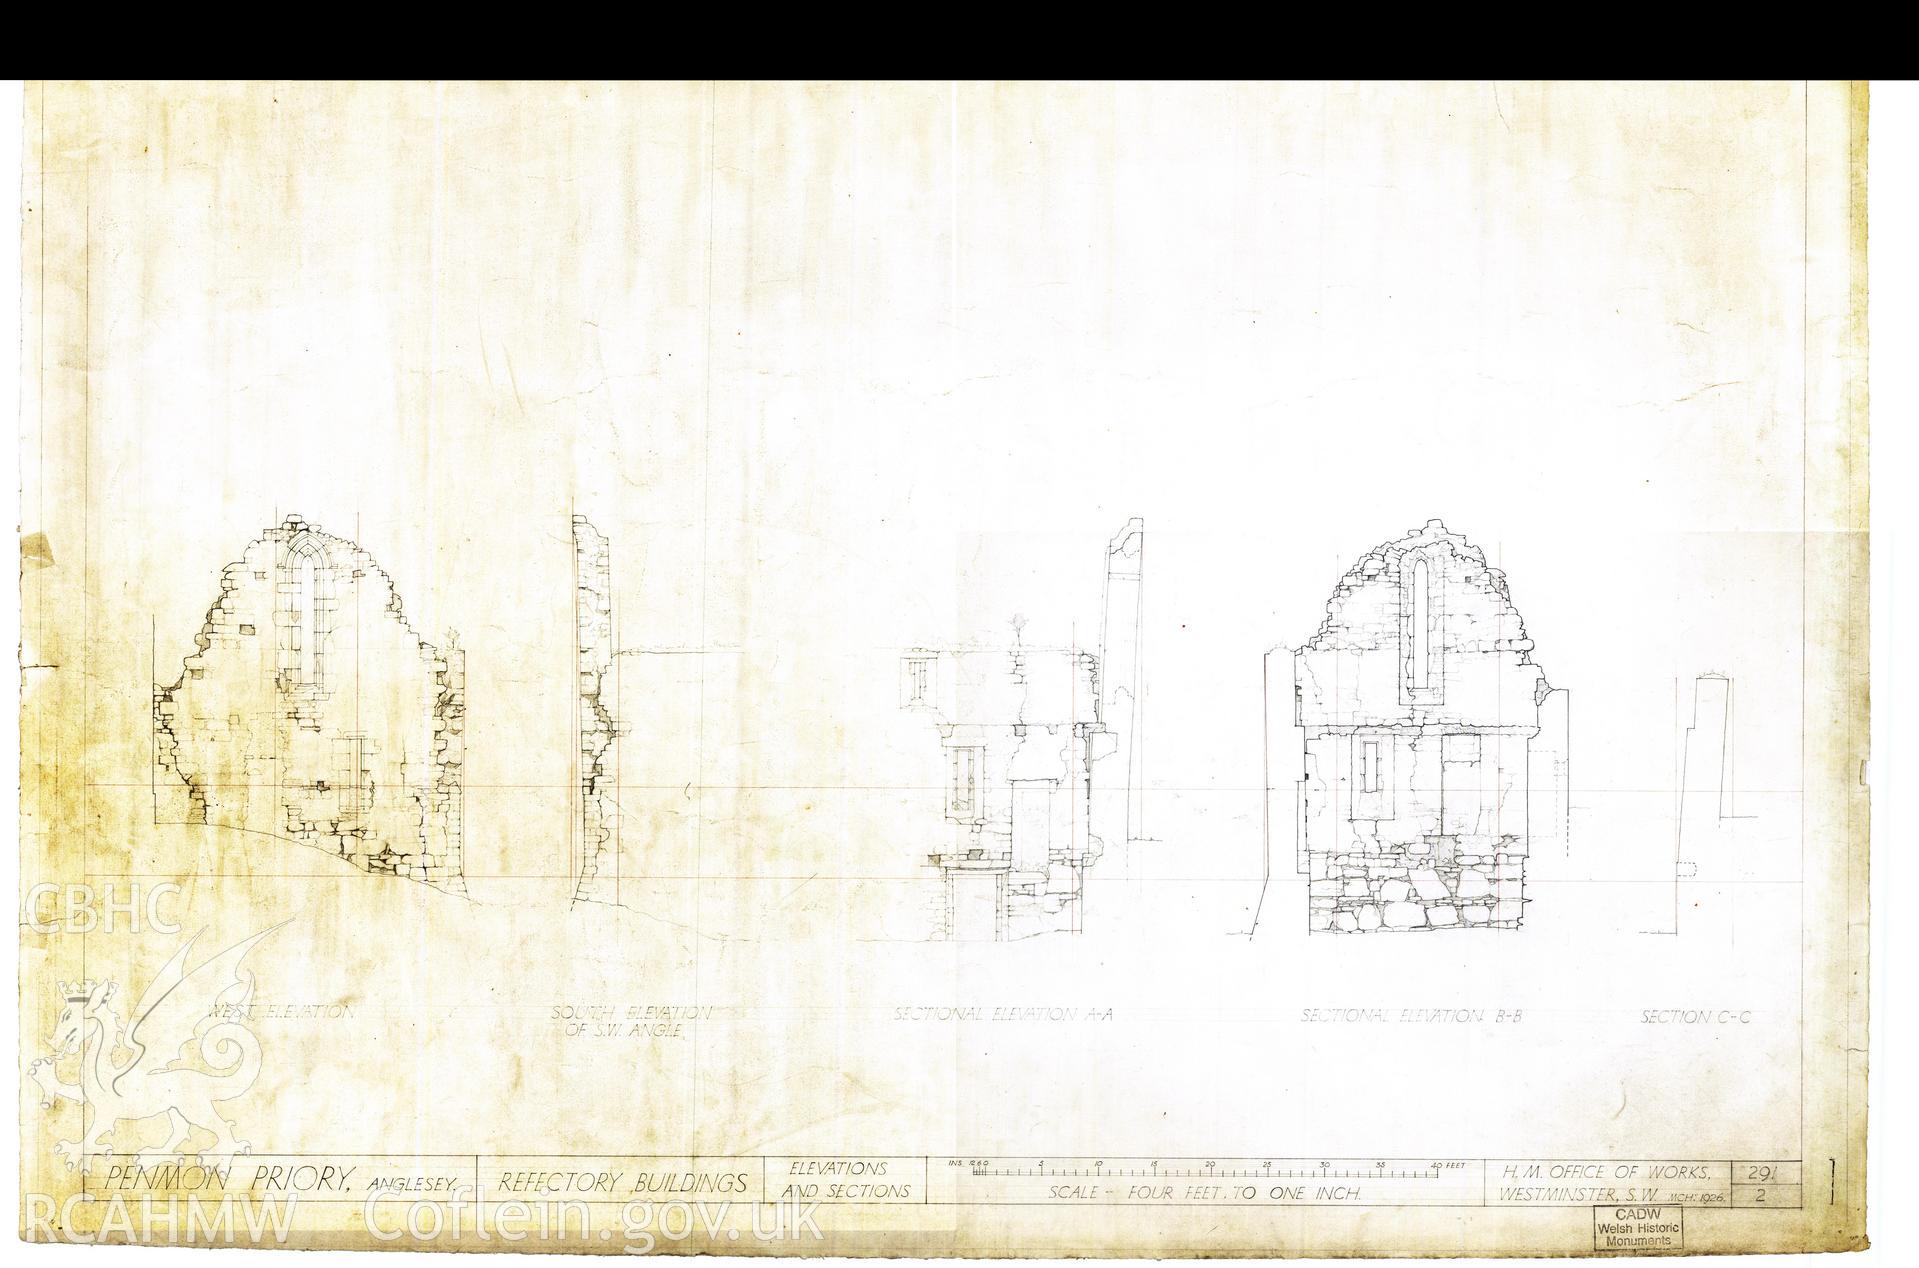 Cadw guardianship monument drawing of Penmon Priory. Refectory, draft elevs+sections. Cadw Ref. No:291/2. Scale 1:48.